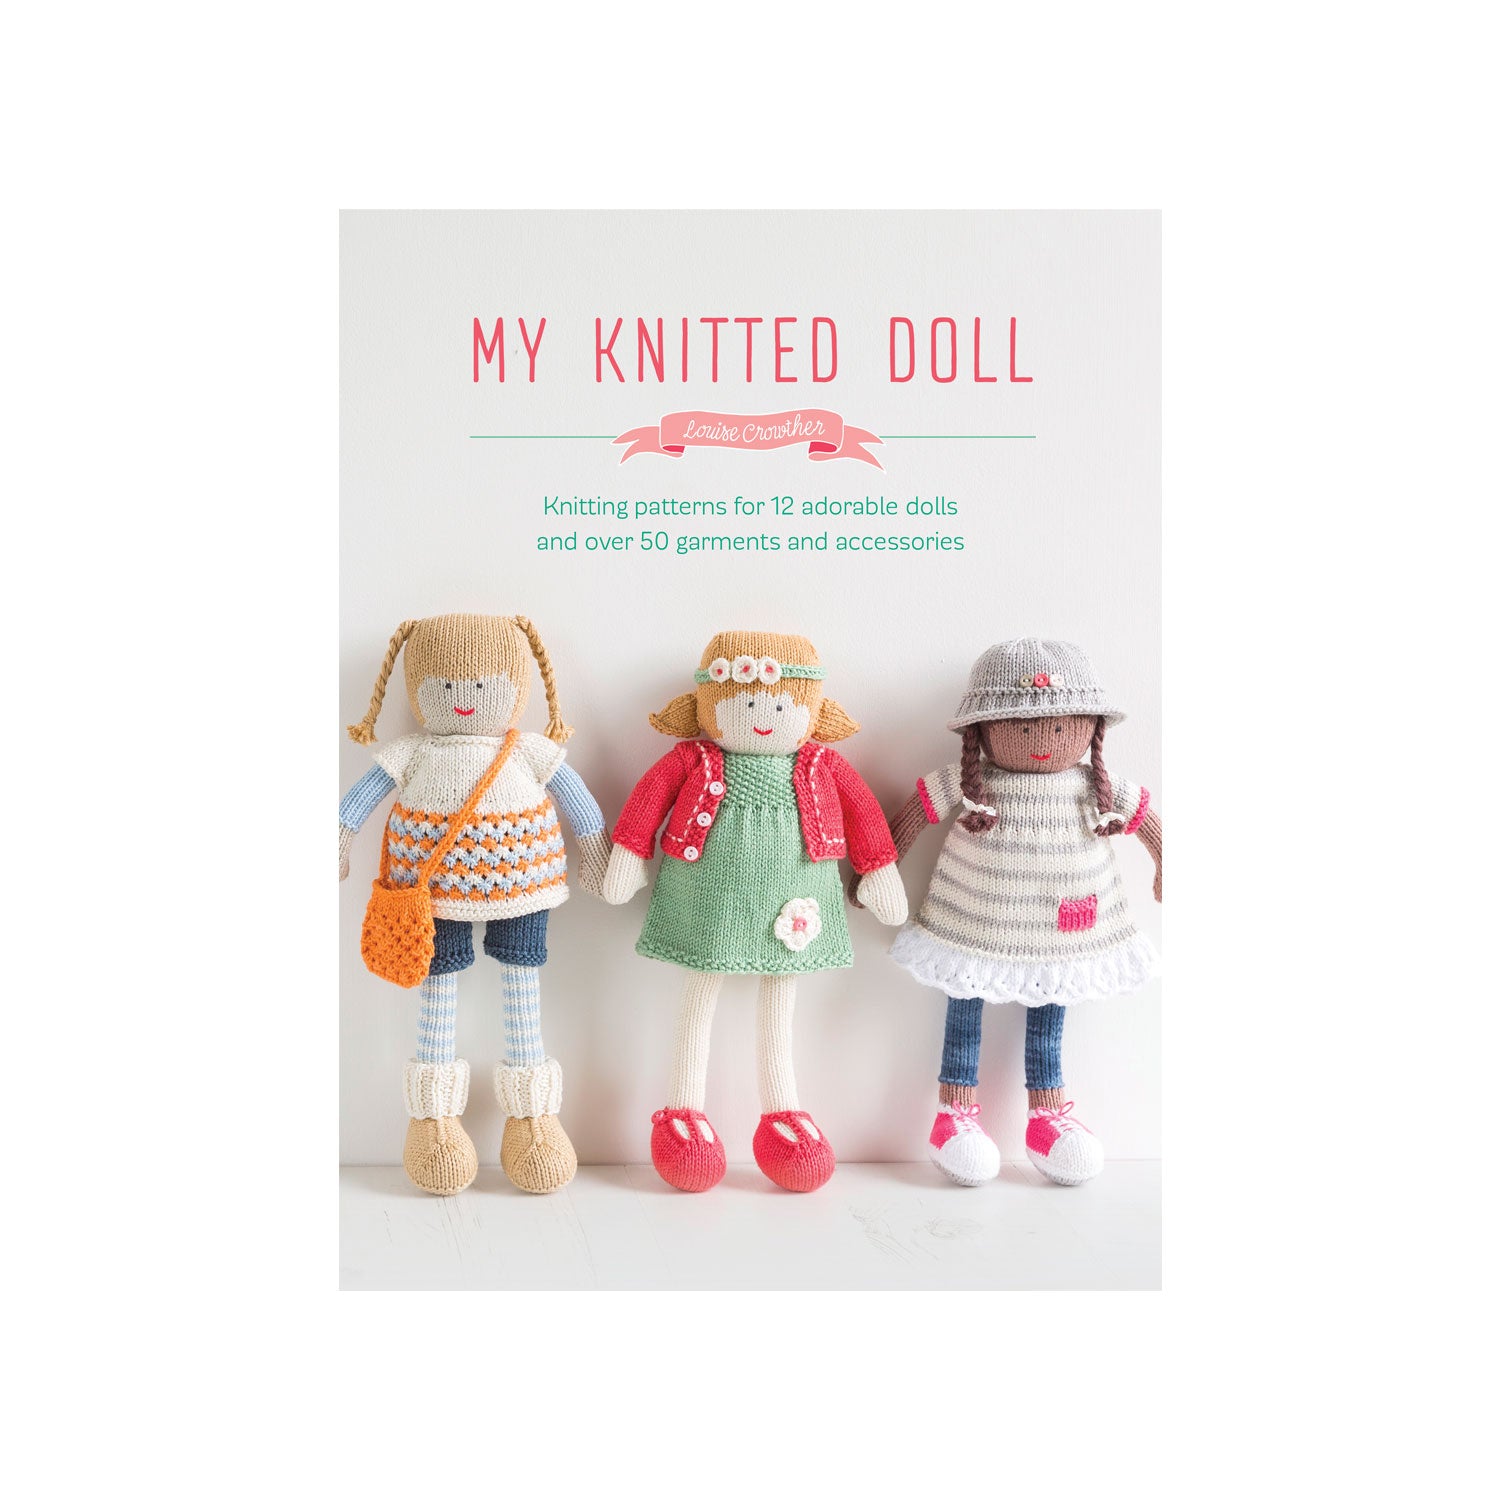 My Knitted Doll - Louise Crowther